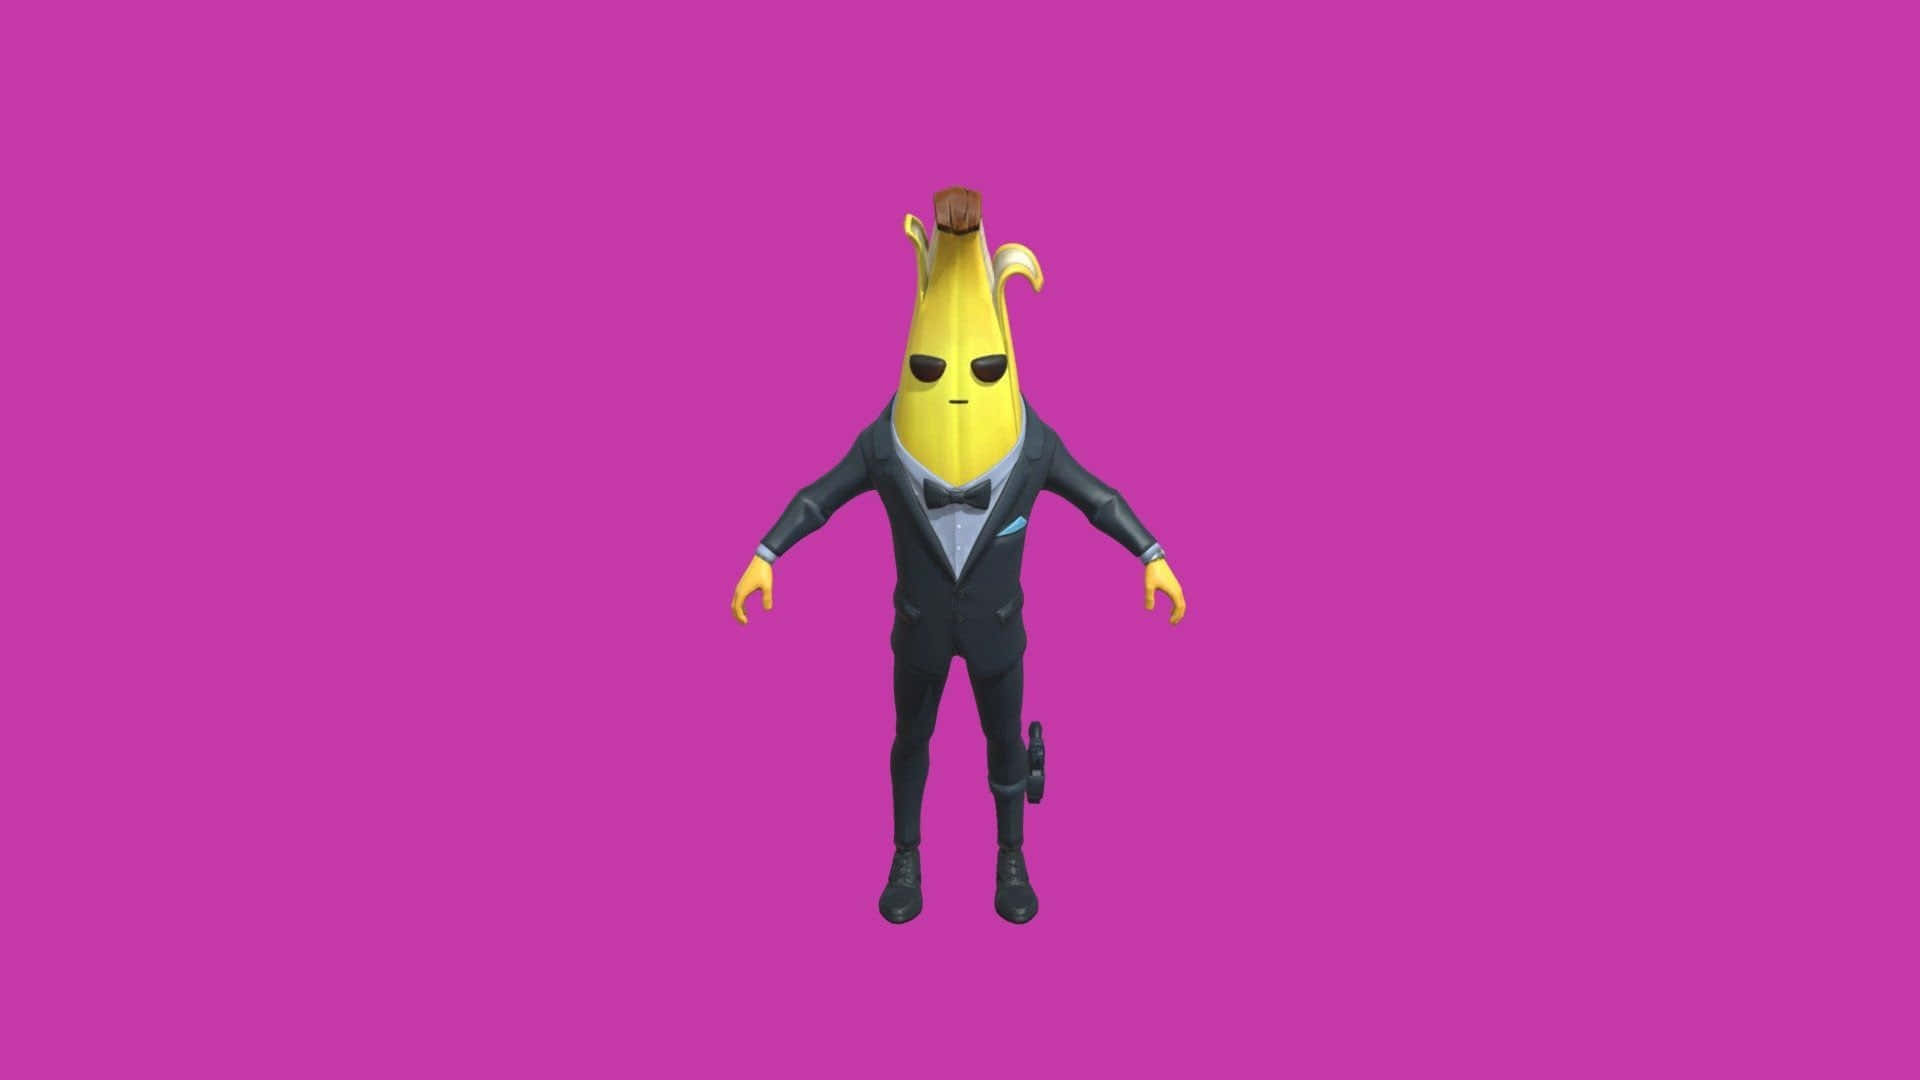 A Banana Dressed In A Suit And Tie Wallpaper